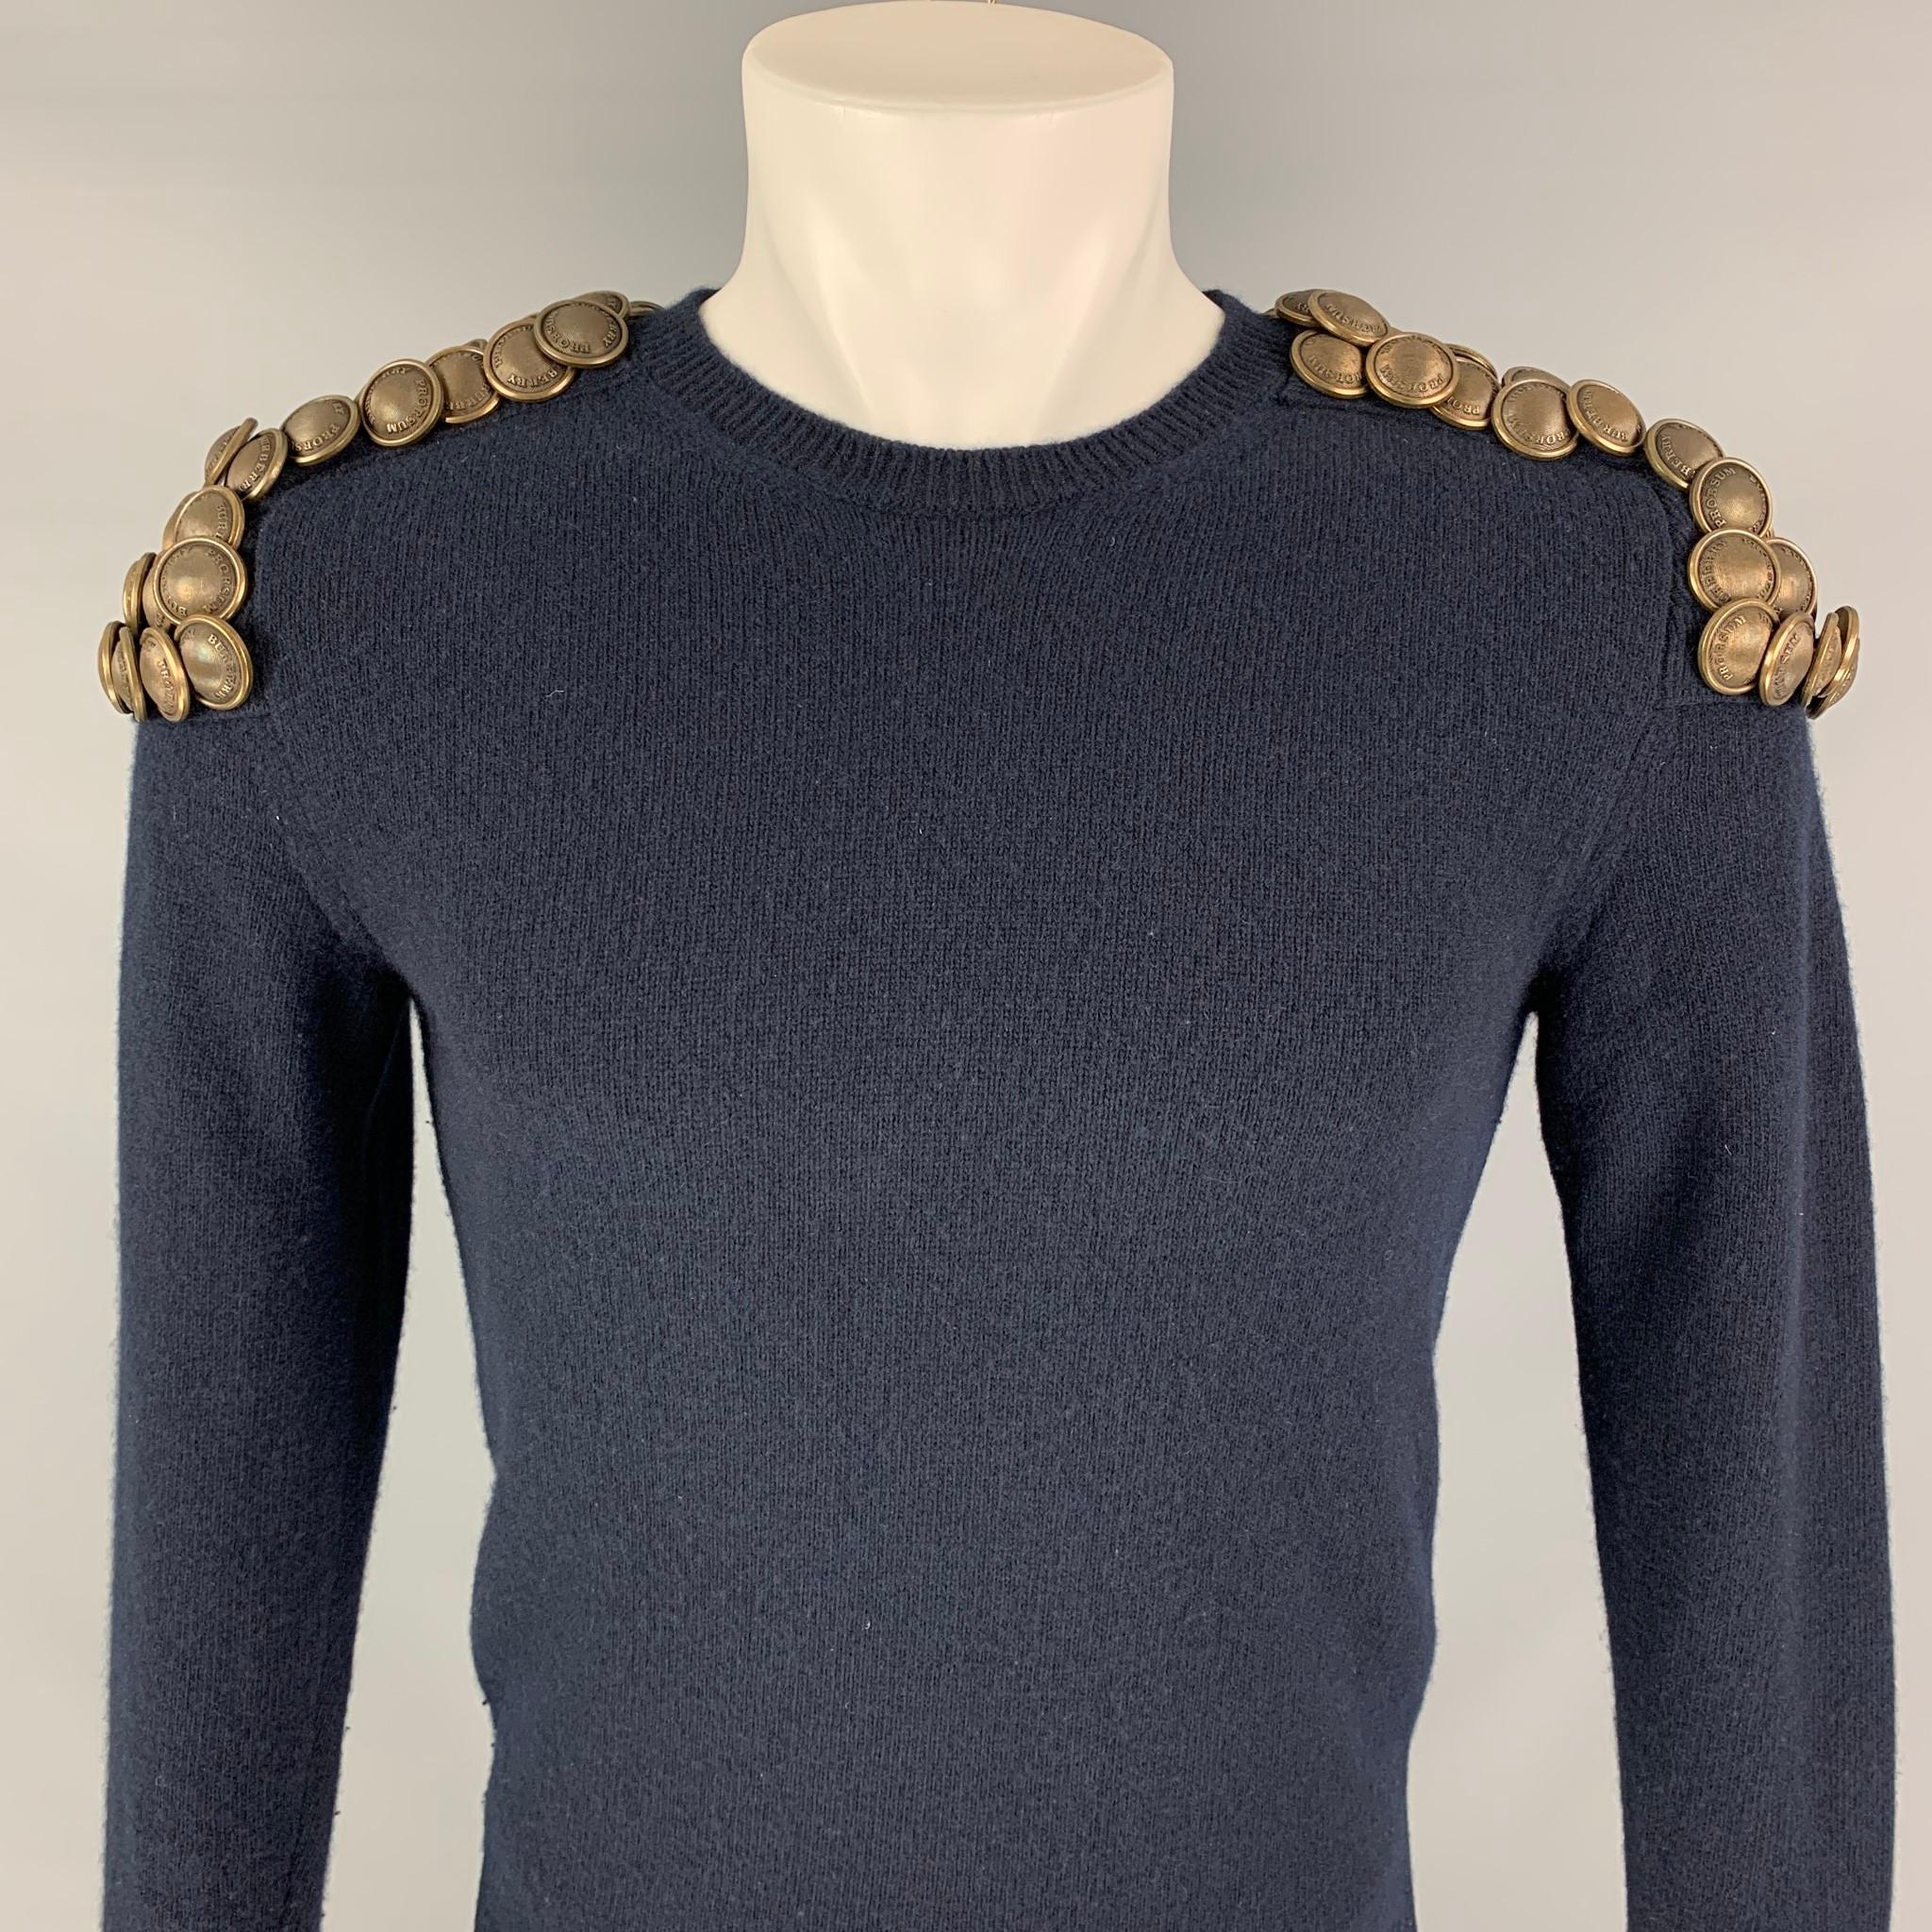 BURBERRY PRORSUM Iconic Fall 2010 Collection sweater comes in a navy knitted wool featuring a military inspired design with shoulder gold tone button epaulettes and a ribbed crew-neck. Made in Italy.

Excellent Pre-Owned Condition.
Marked: